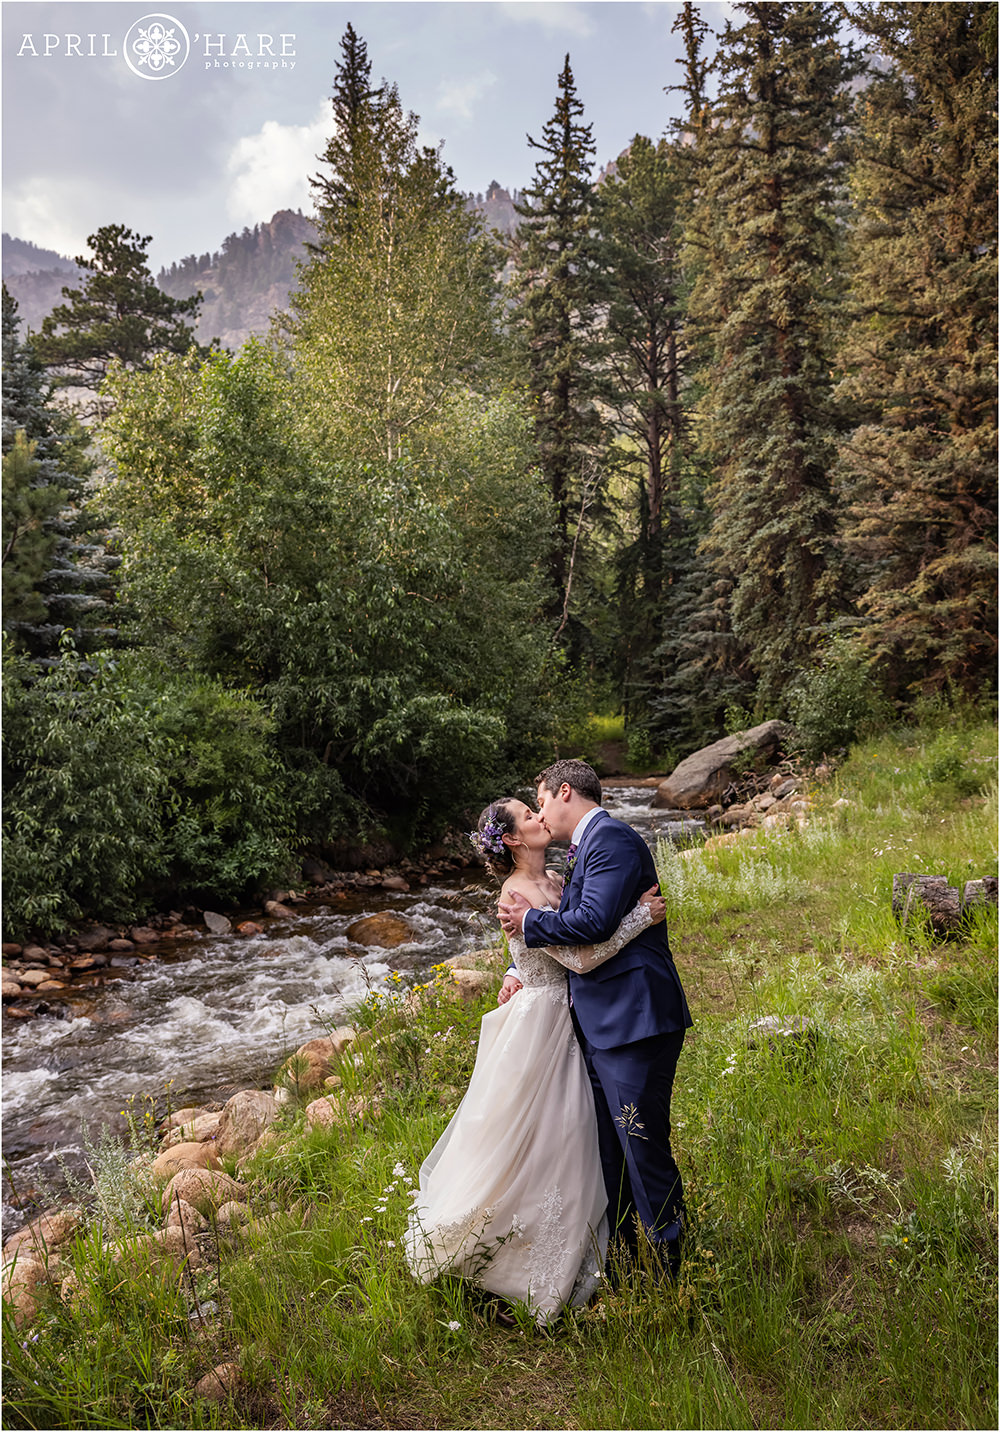 Romantic portrait of Bride and Groom kissing in the wildflowers next to Fall River at Estes Park Condos